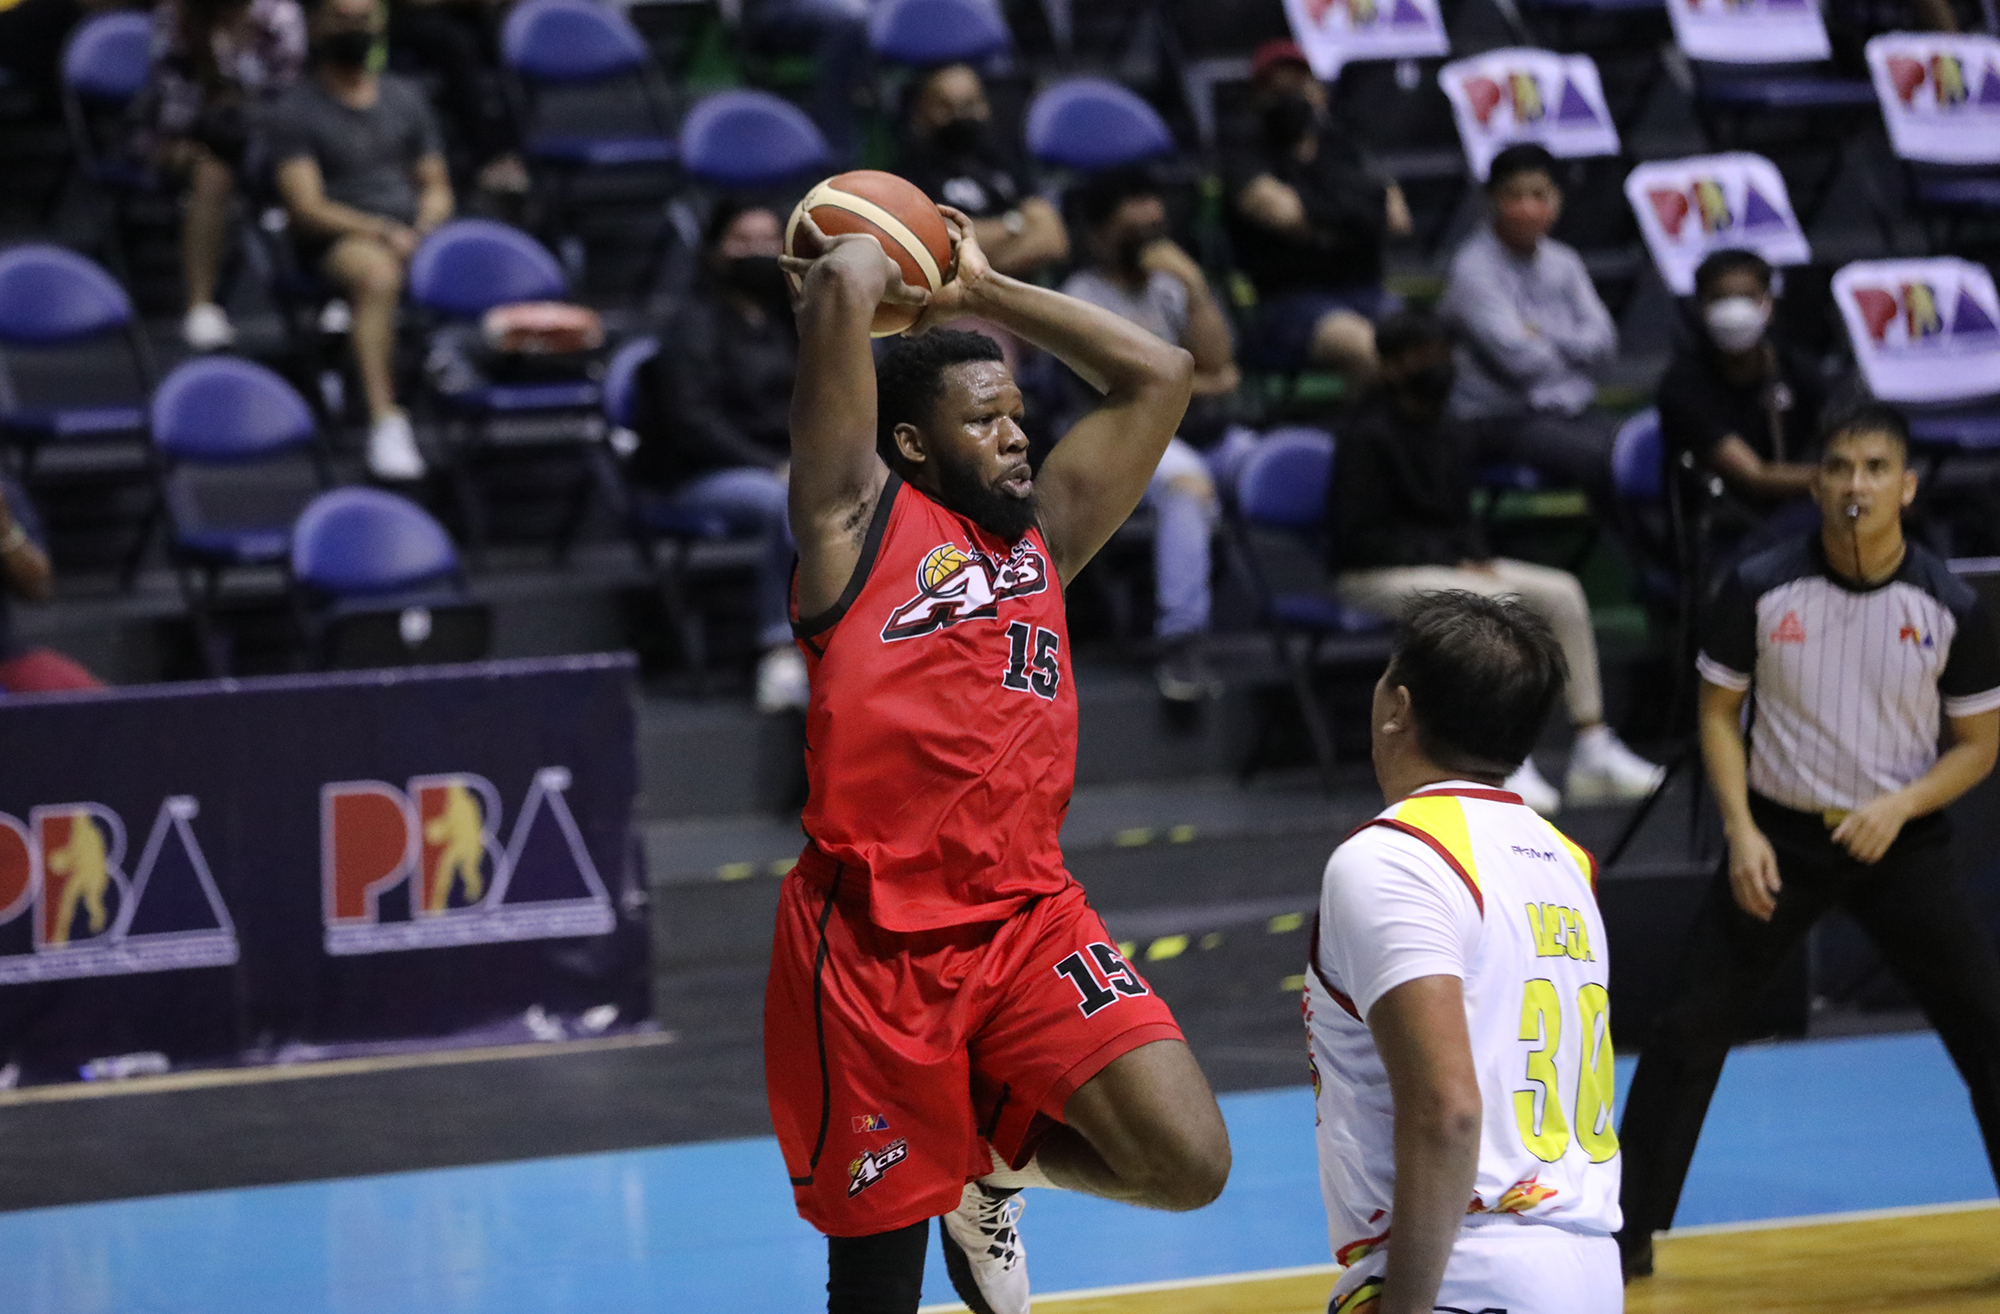 Alaska imports Olu Ashaolu in a 2021 PBA Governors' Cup game. PBA IMAGES